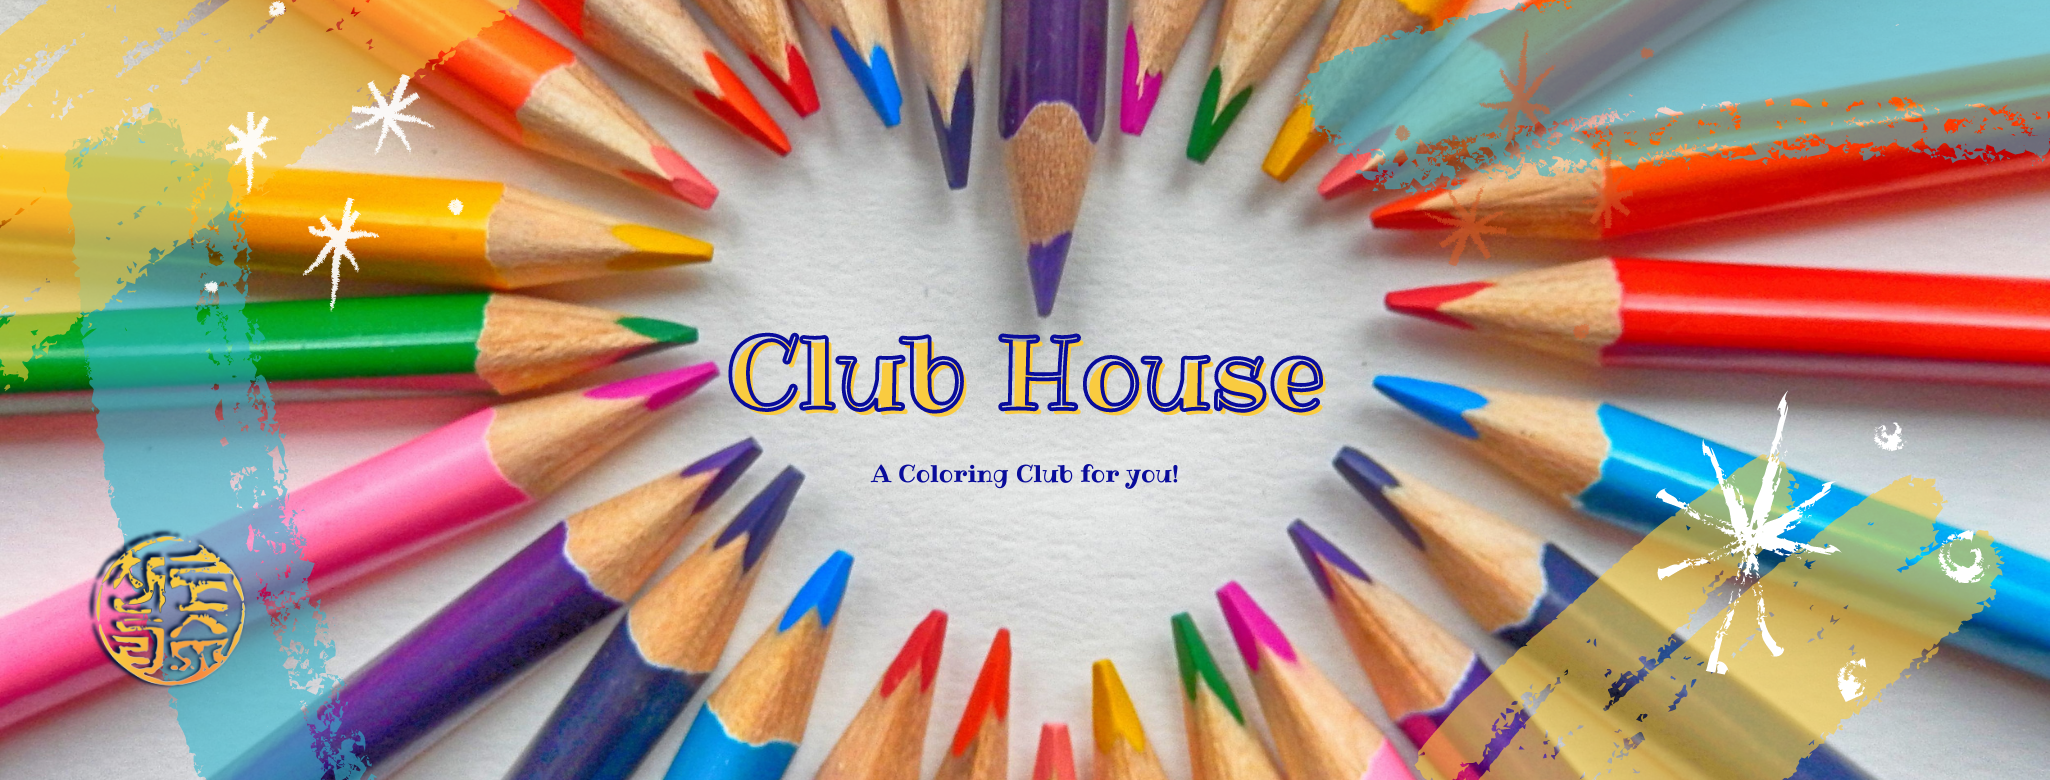 Club House a coloring club for you